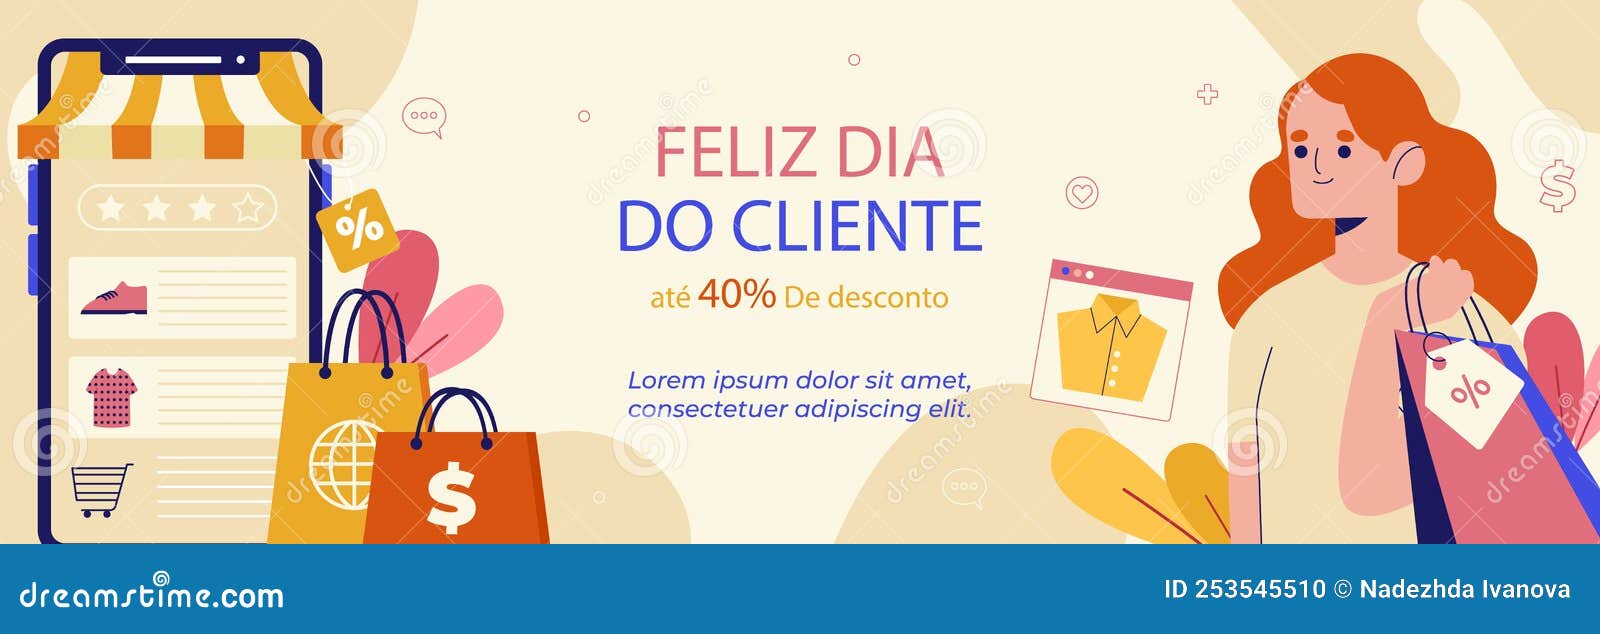 flat horizontal sale banner template for dia do cliente  .